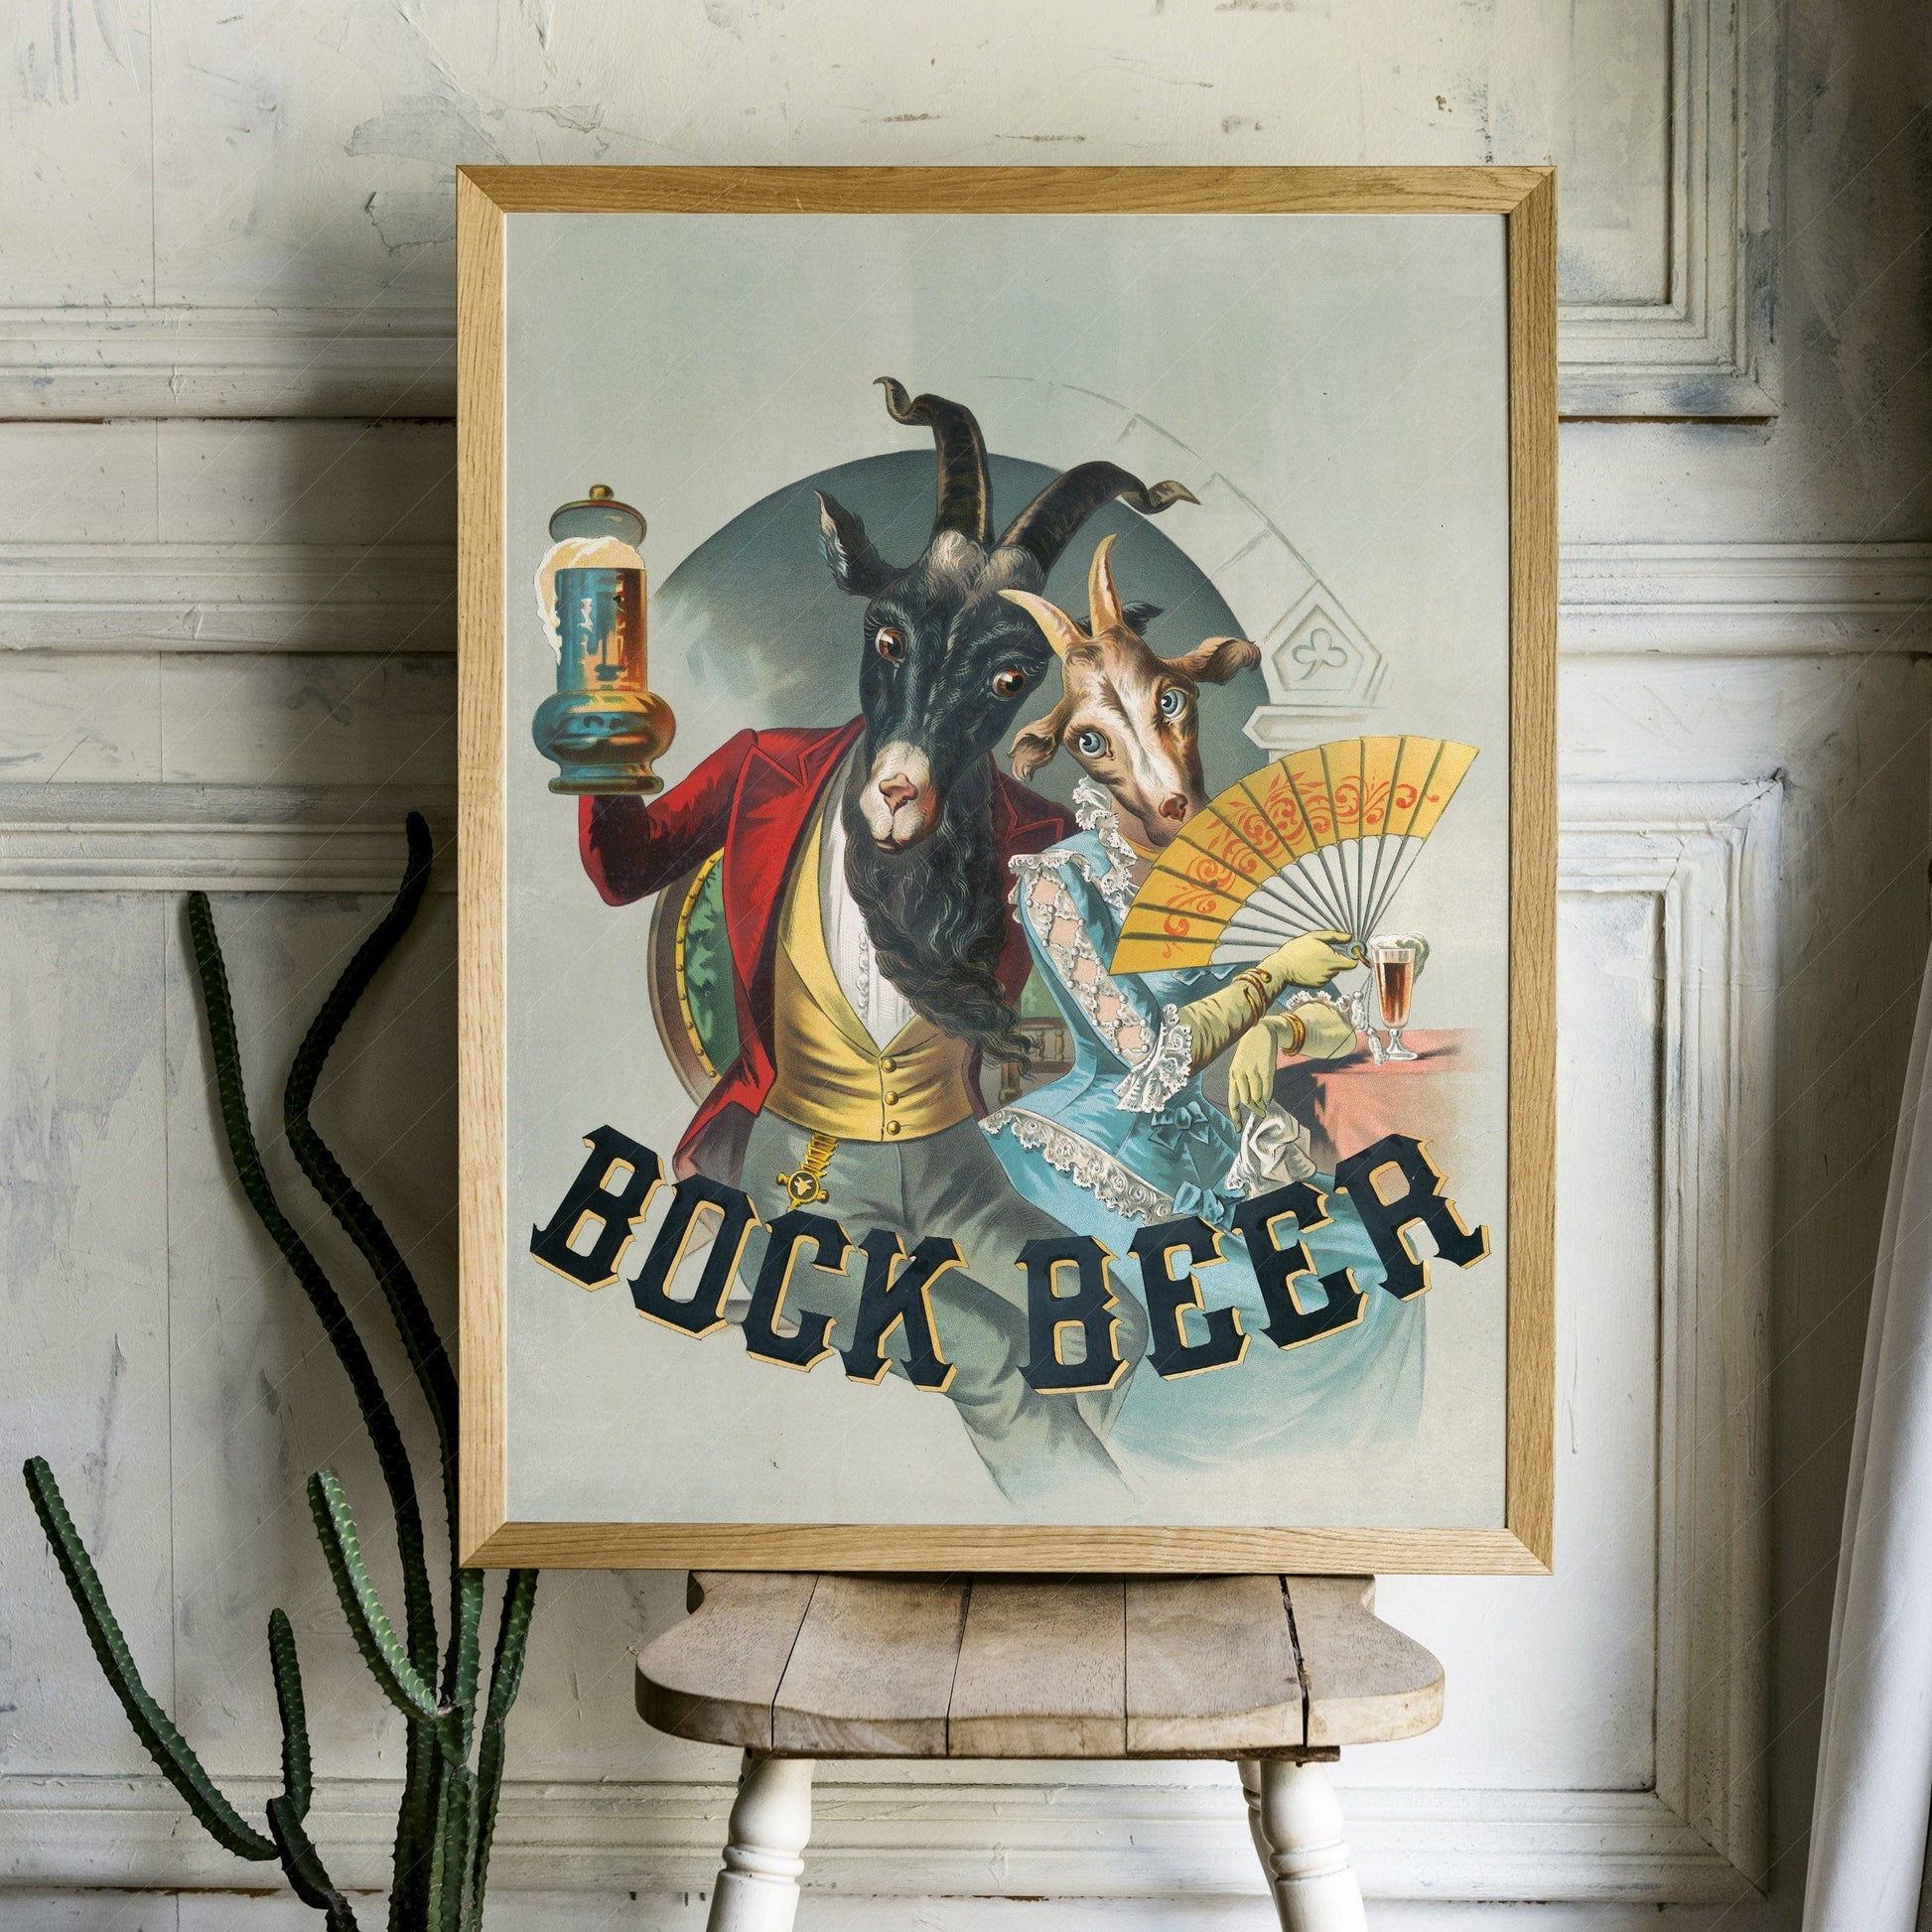 Home Poster Decor Book Beer Poster, Classic Advertising, Alcohol Poster, Party Wall Decor, Vintage Drink Print, Goat Beer, Vintage Bar Decor, Gift for him